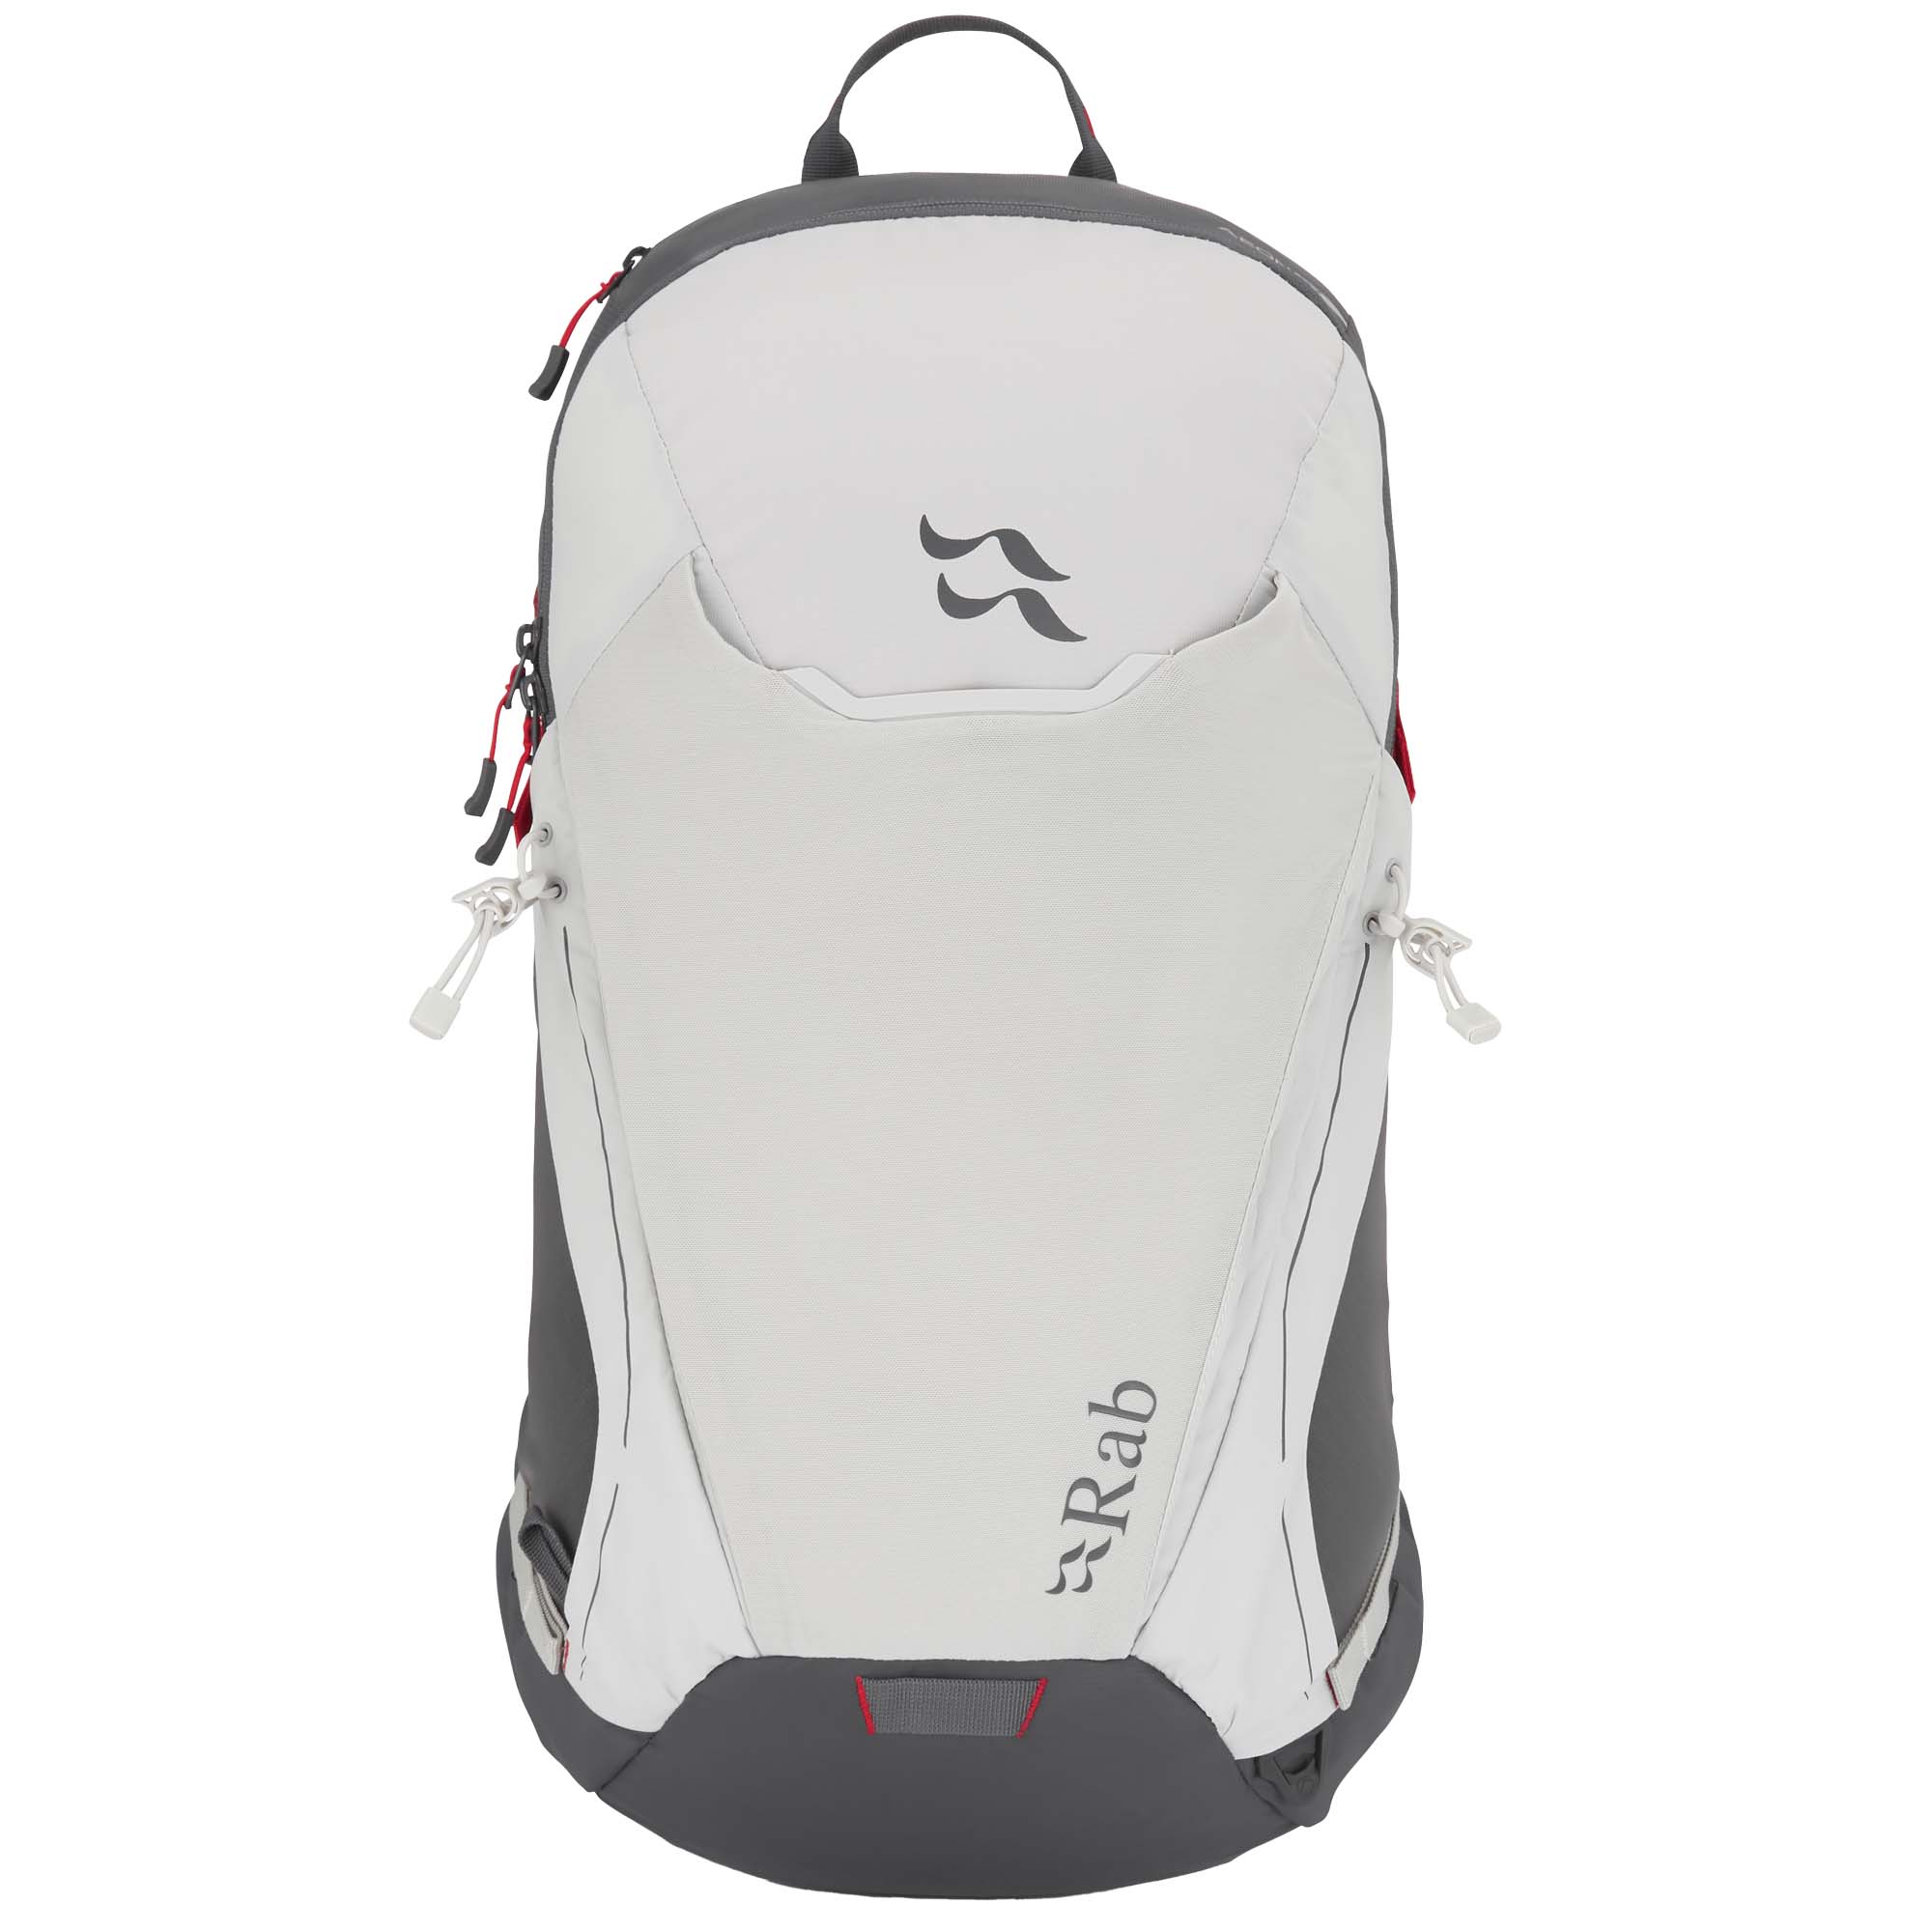 Rab Aeon 27 Technical Daypack/Backpack